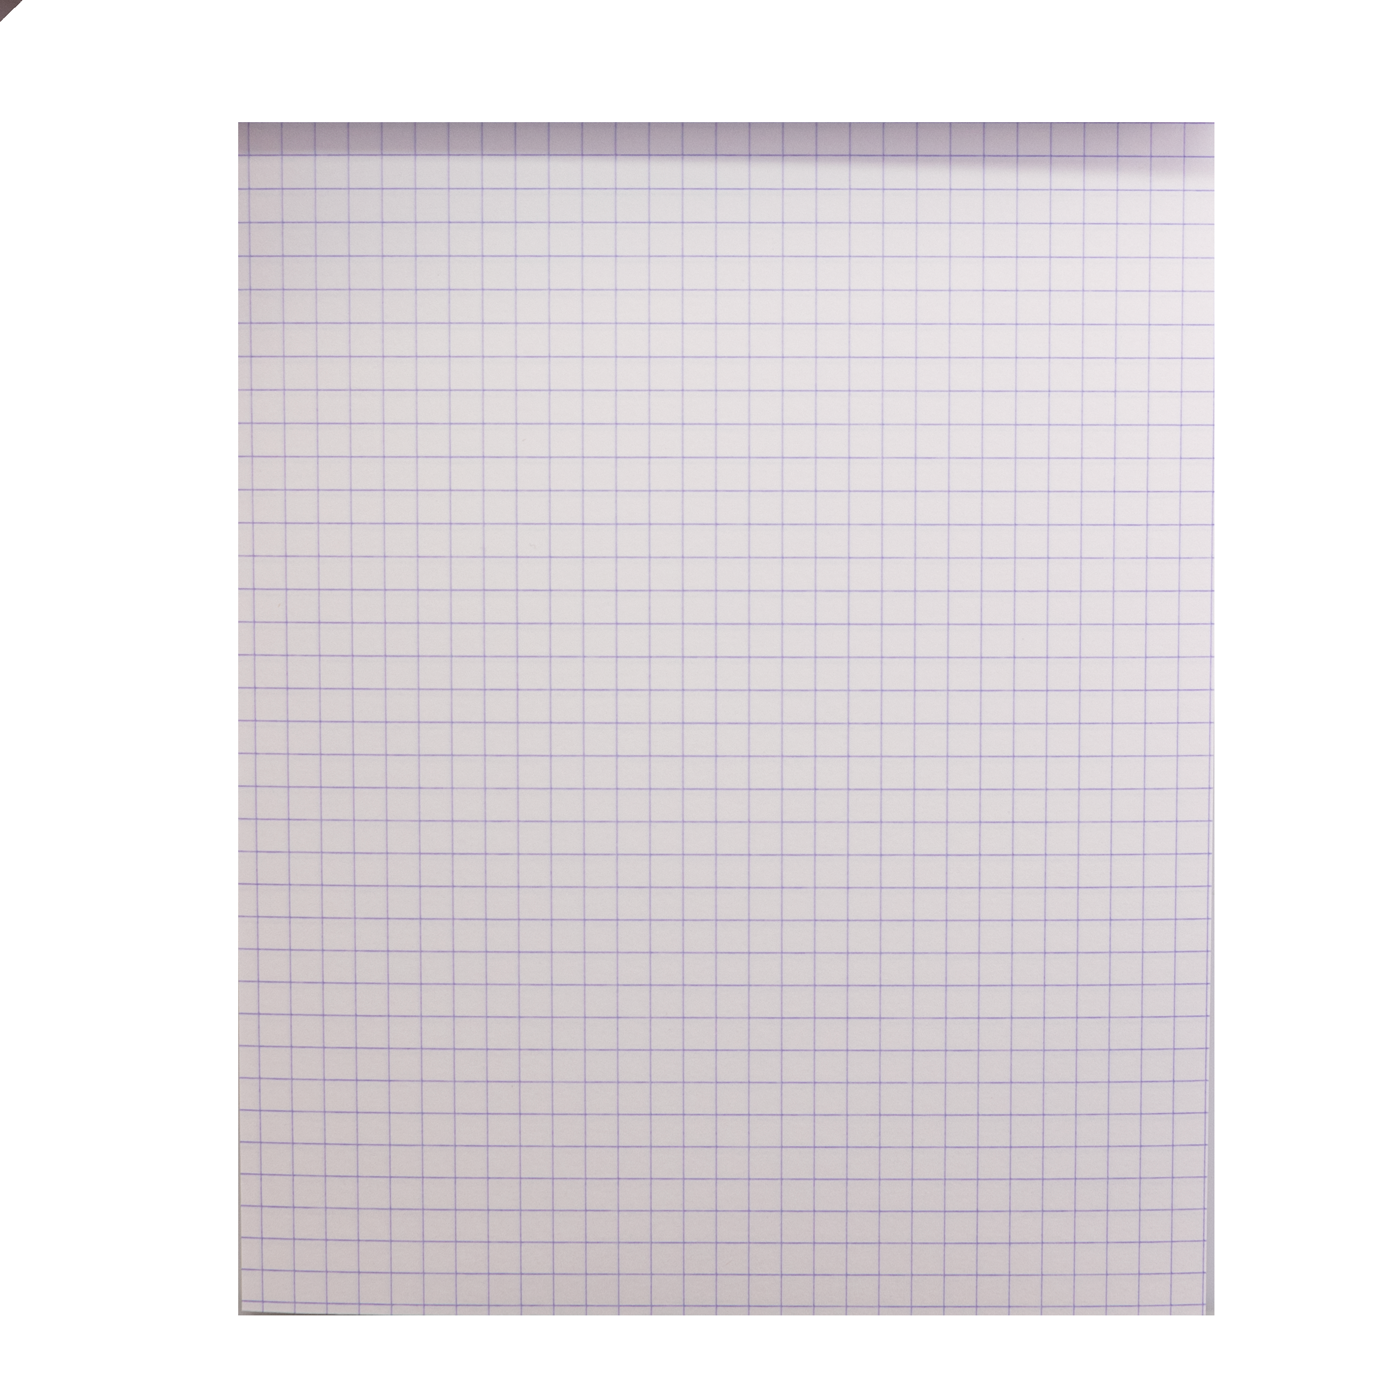 Clairefontaine Top Staple Bound Notepad 3 x 4 - Graph